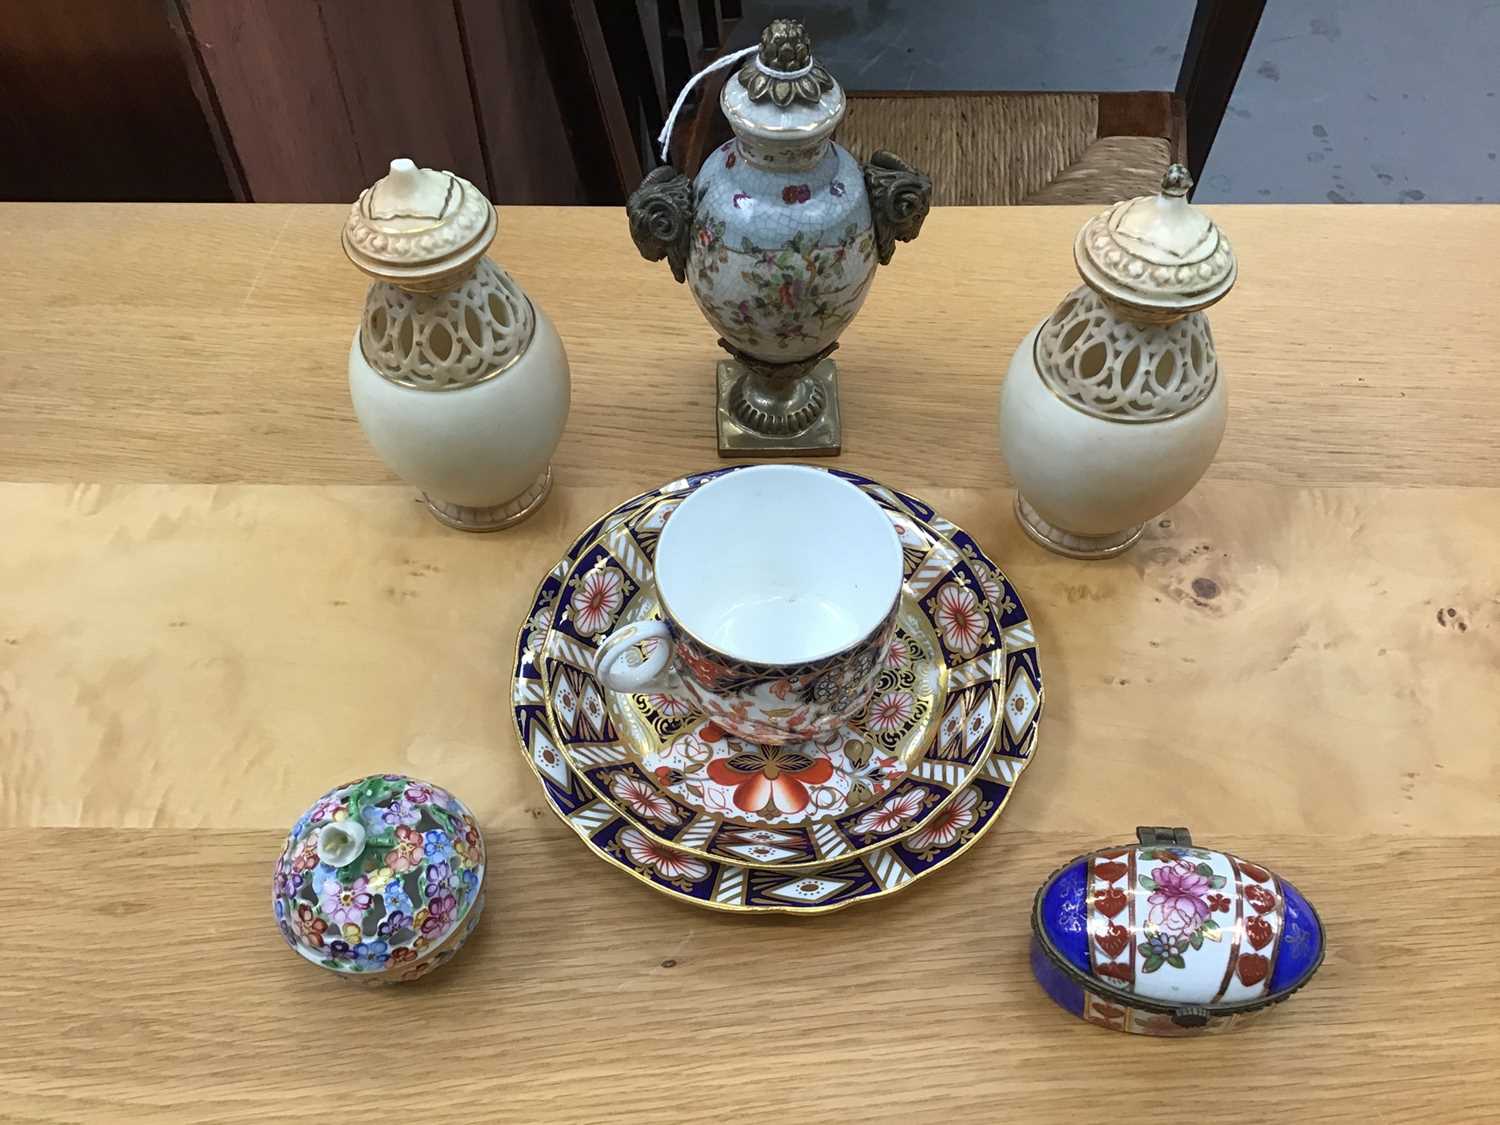 Lot 18 - Selection of decorative china to include Royal Crown Derby teacup and saucer, together with Herend floral potpourri scent trinket box,  and other named china